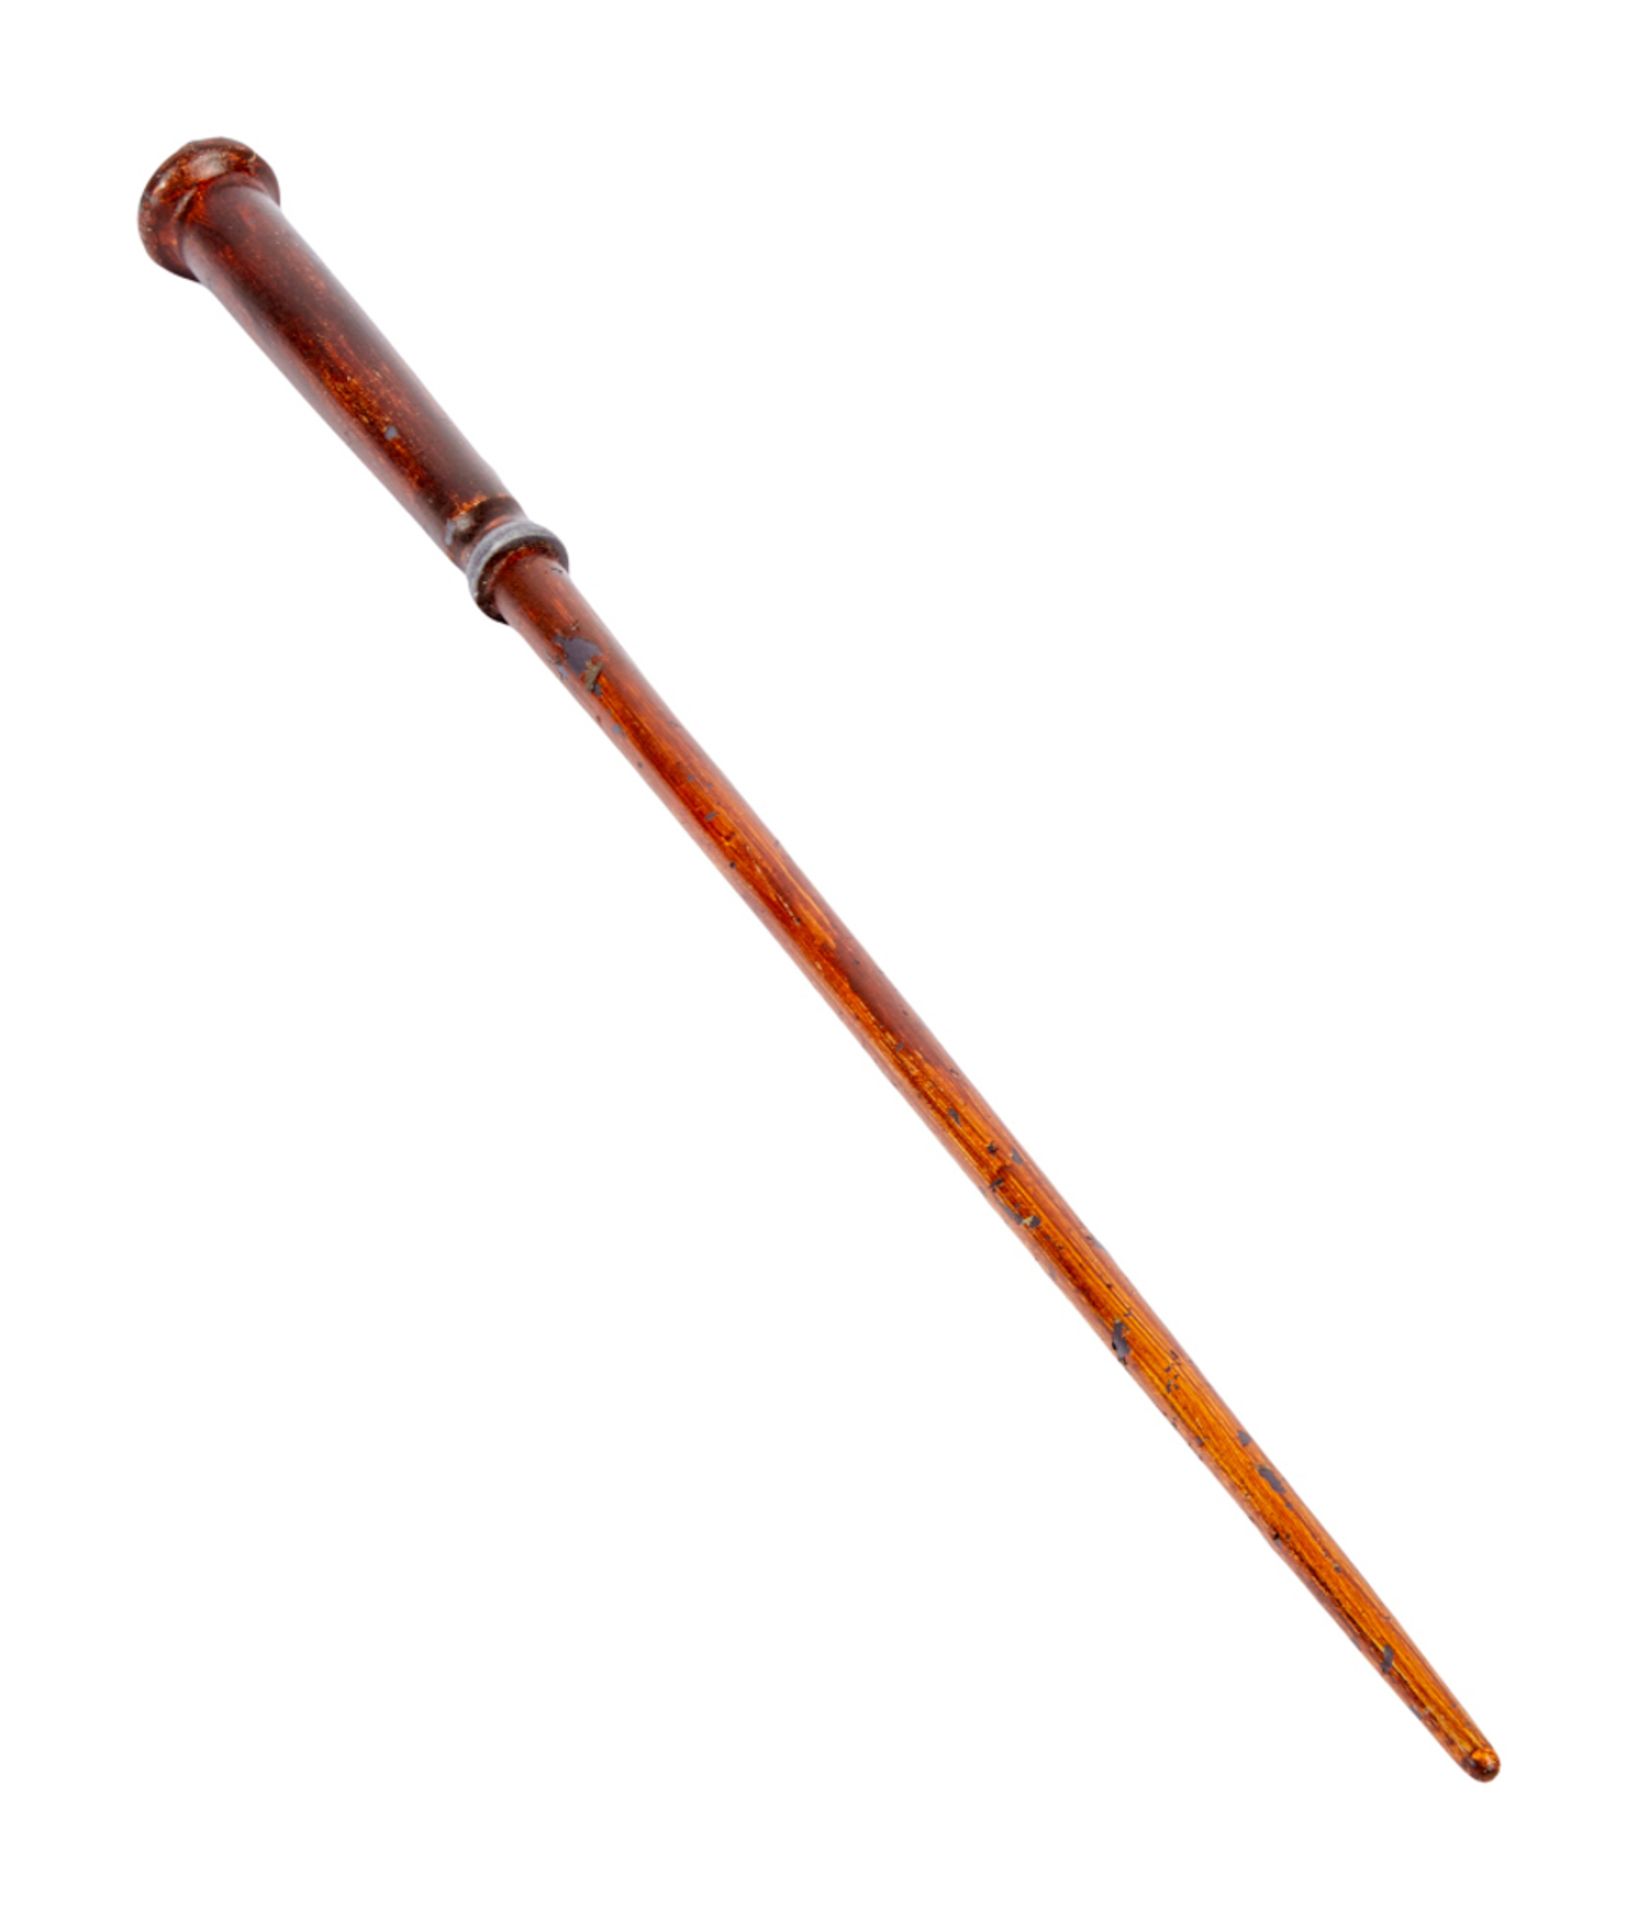 FANTASTIC BEASTS AND WHERE TO FIND THEM | KATHERINE WATERSTON "PORPENTINA GOLDSTEIN" WAND PROP (WITH - Image 5 of 8